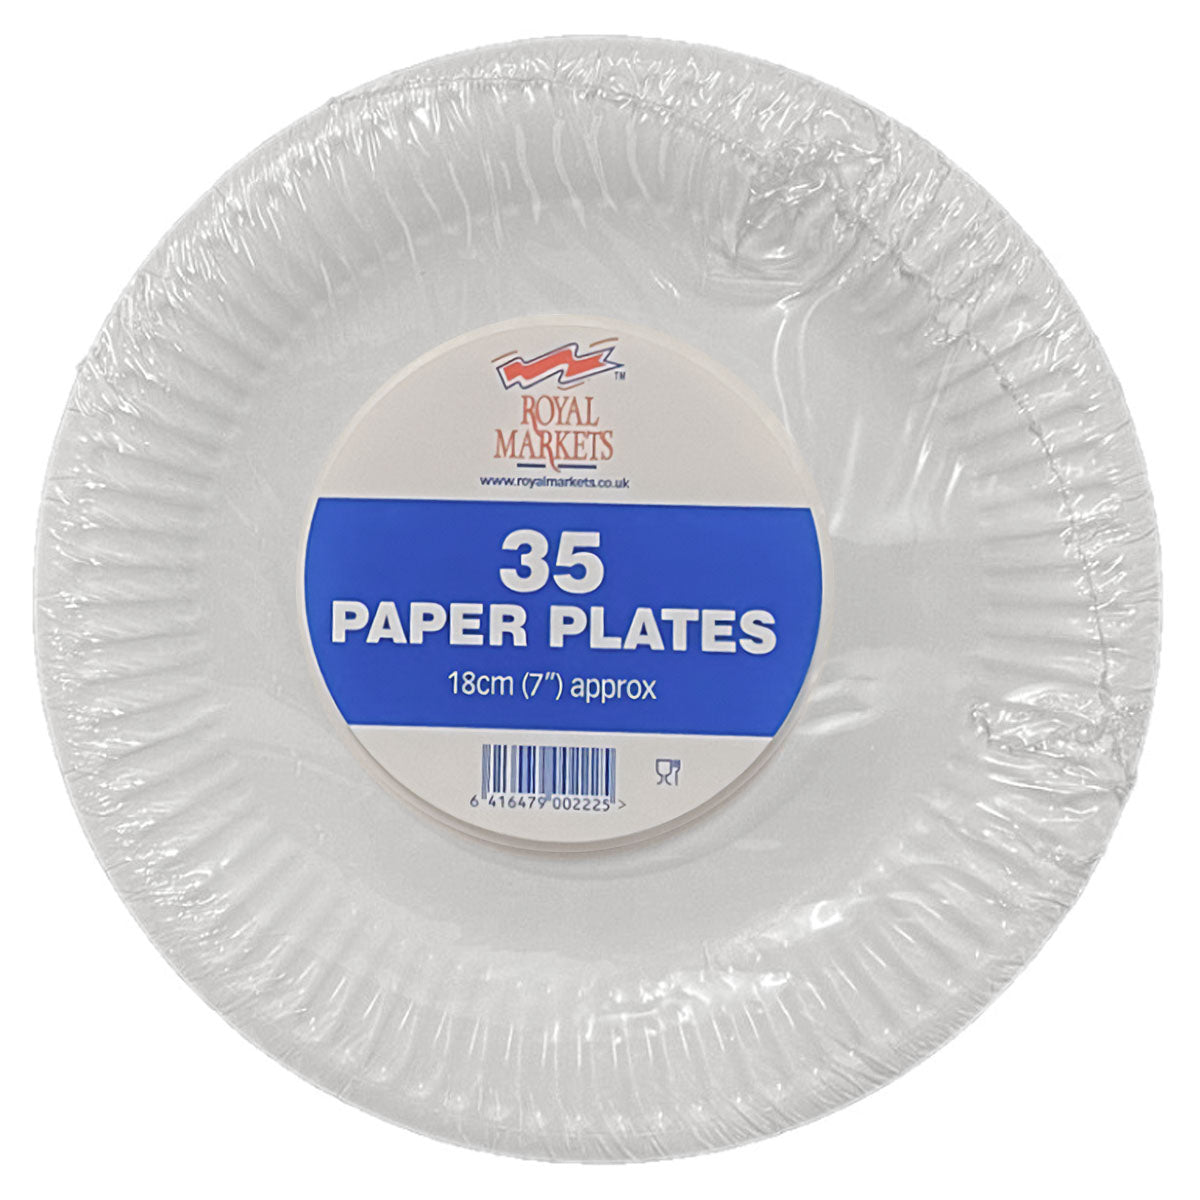 Royal Markets - 7" Disposable Paper Plates - 35 Pack - Continental Food Store